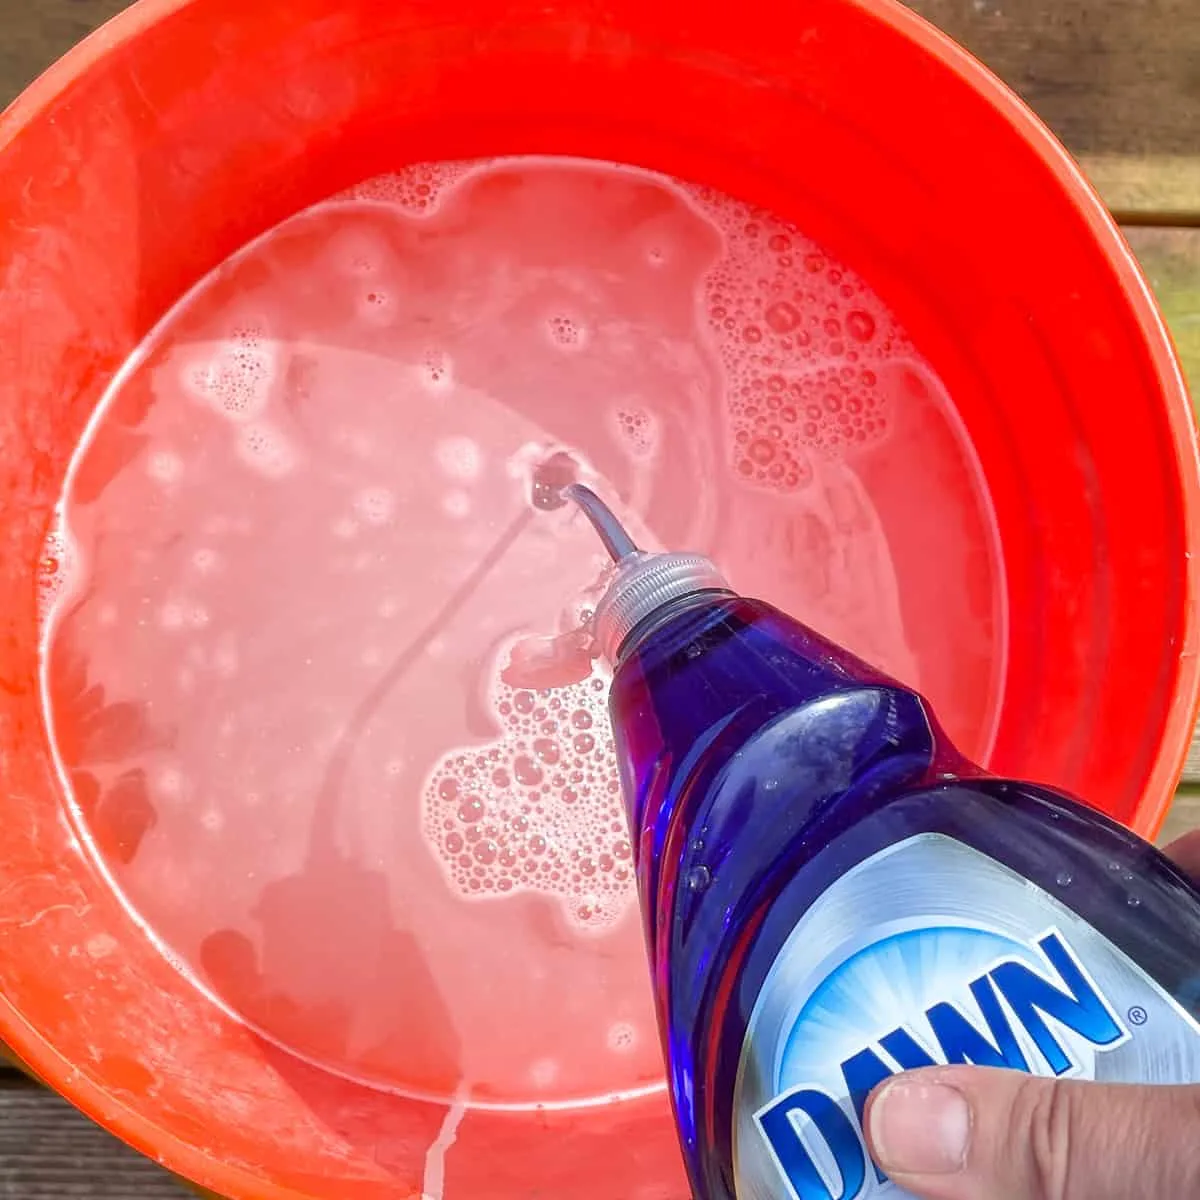 adding dawn dish soap to deck cleaner